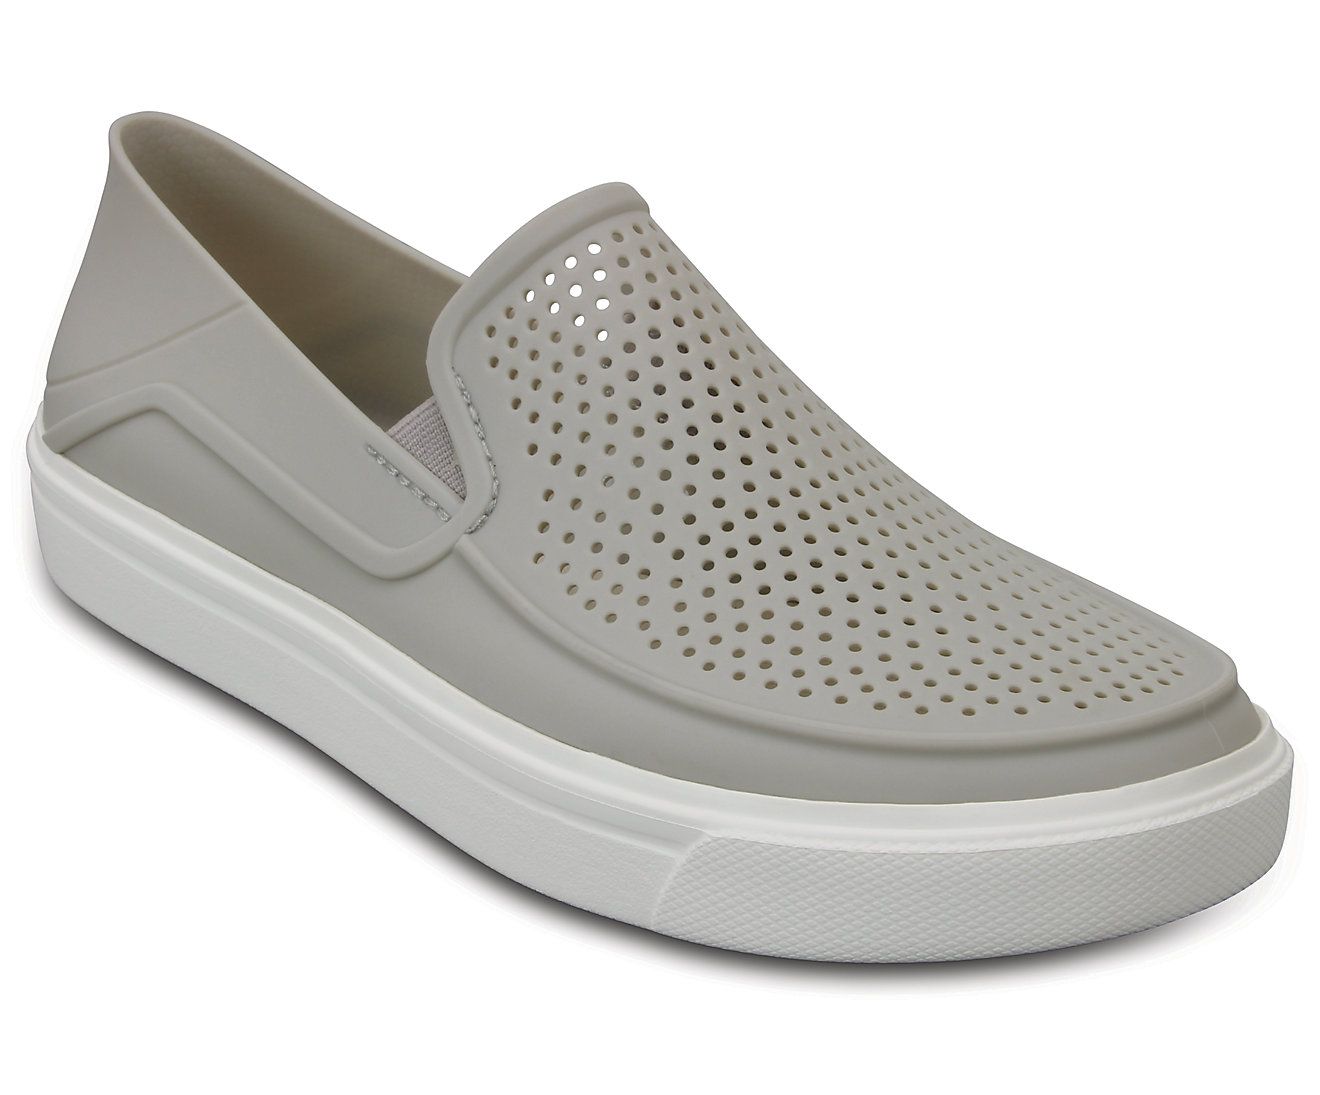 82  Crocs type shoes cheap india for All Gendre